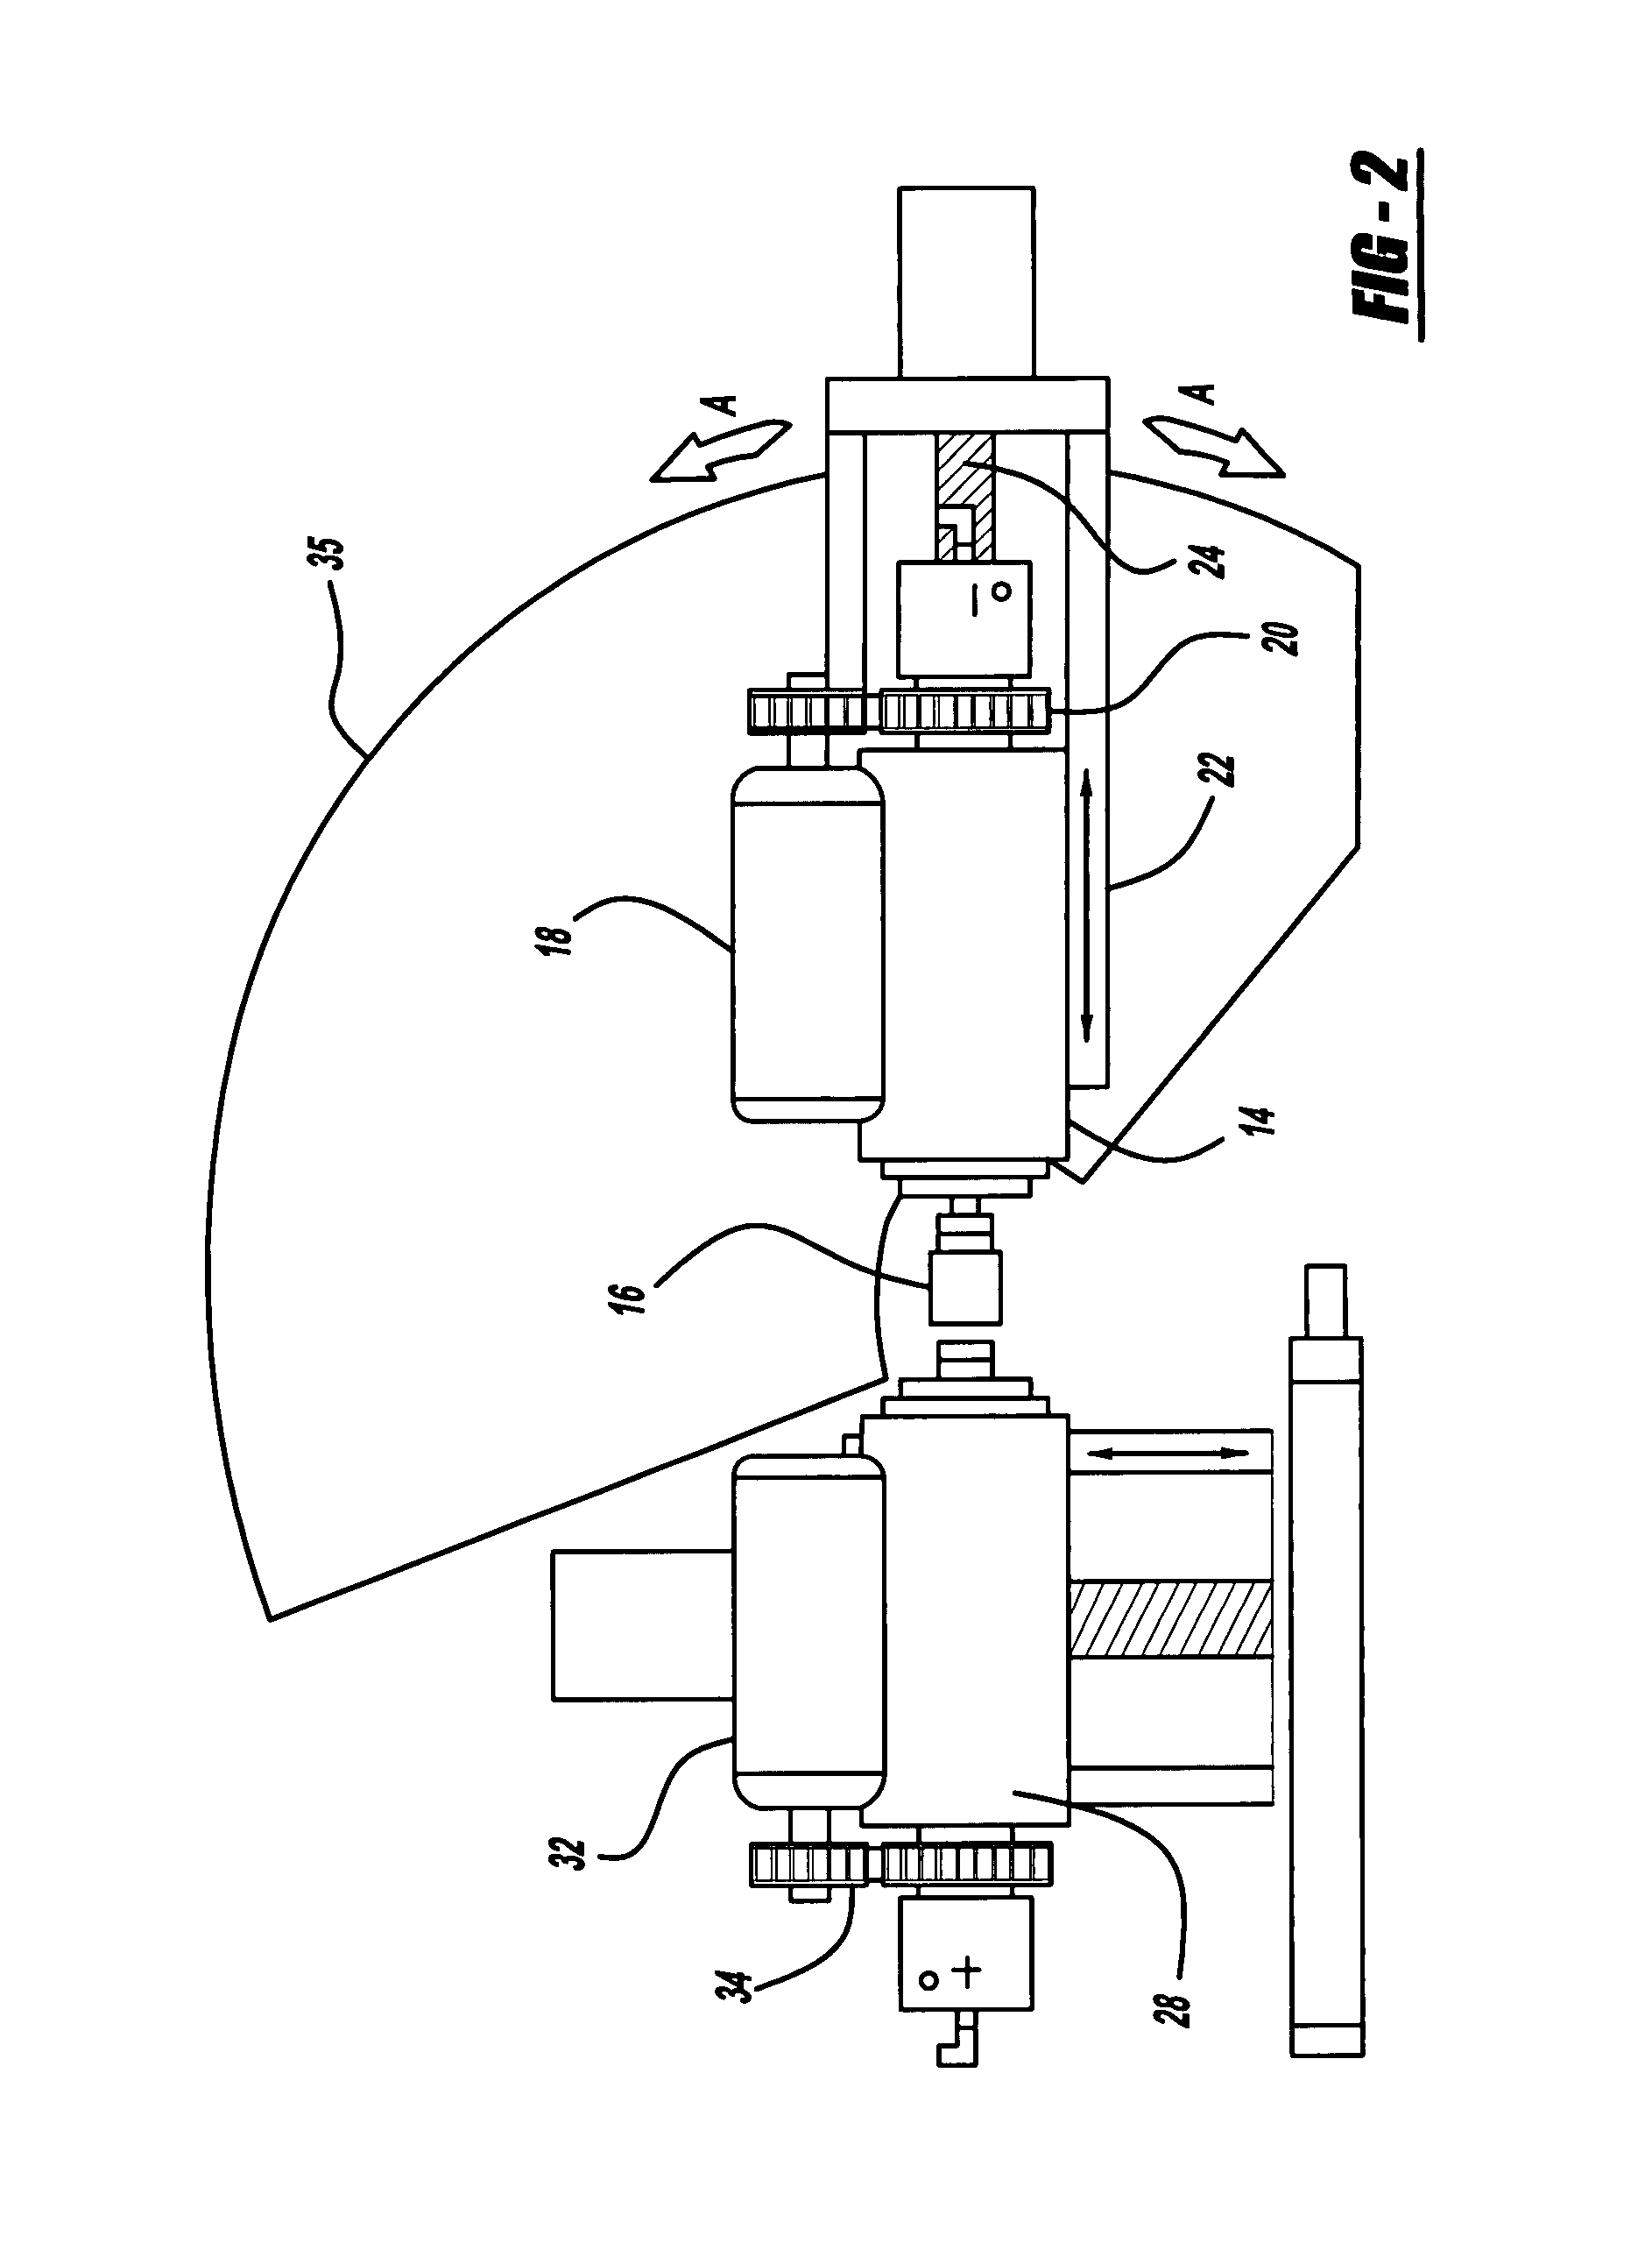 Method for finishing a workpiece